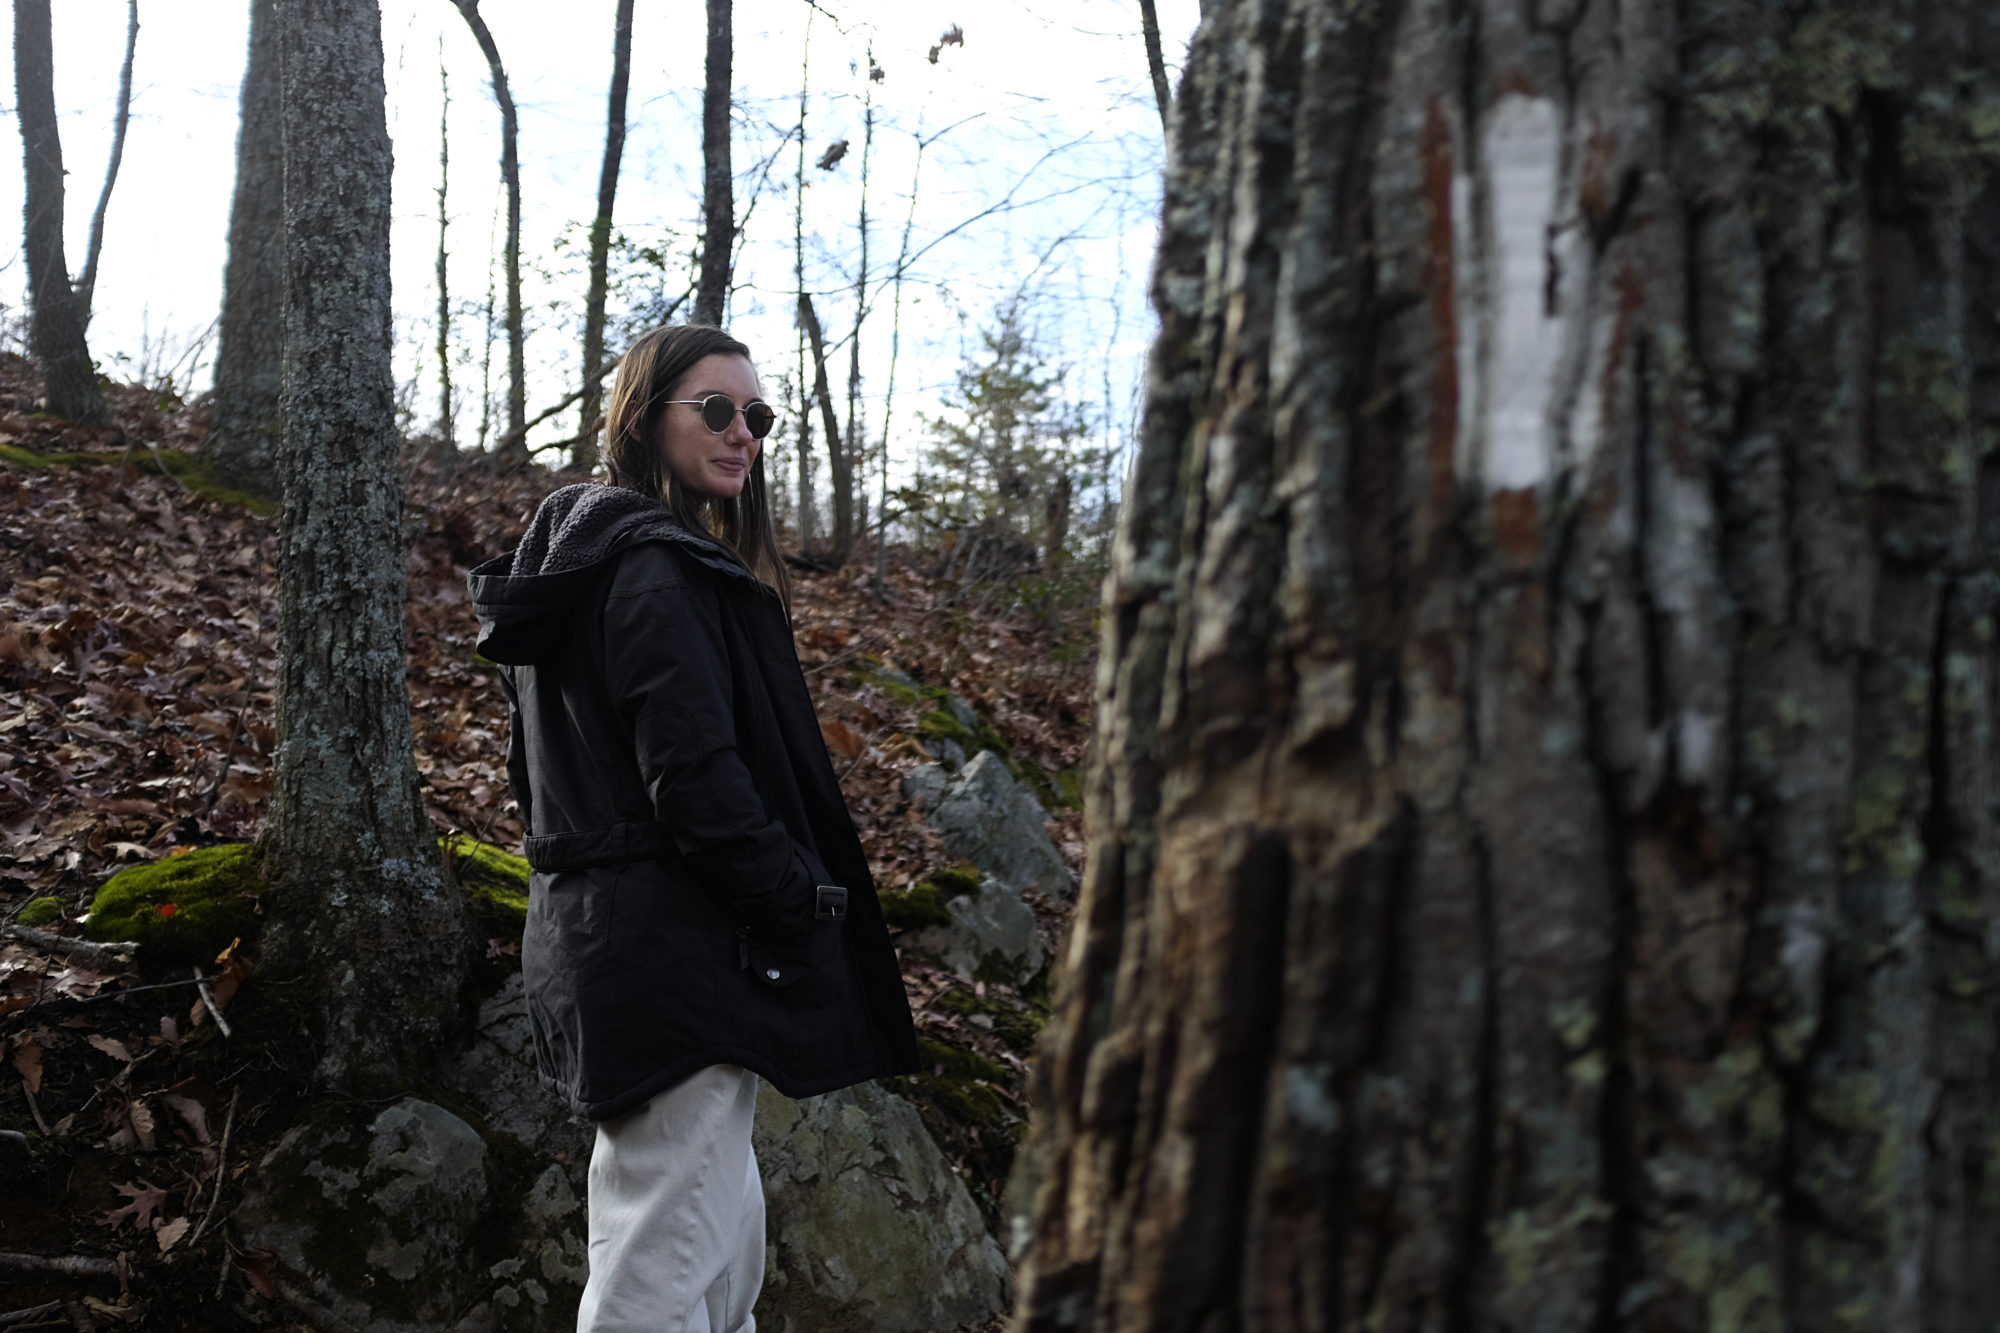 Alyssa hikes in Johnson City wearing a jacket, boots, and white pants. She is looking back at the camera, and a white trail blaze is visible